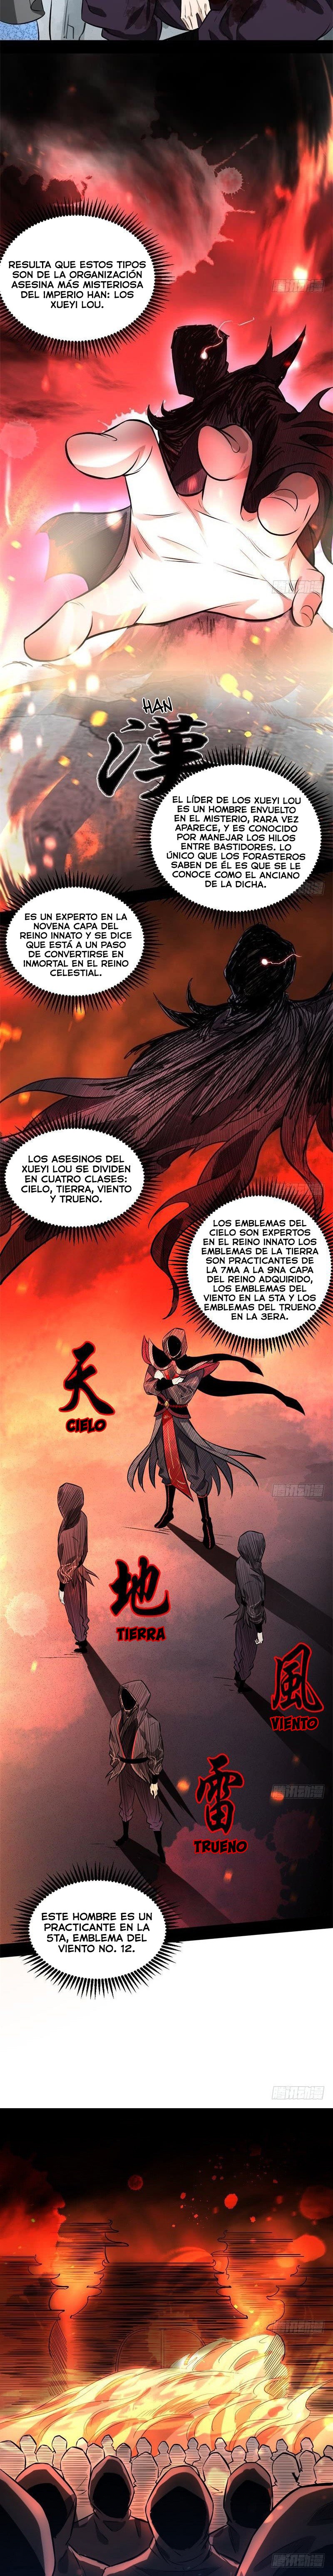 Manga Soy un dios maligno Chapter 32 image number 9